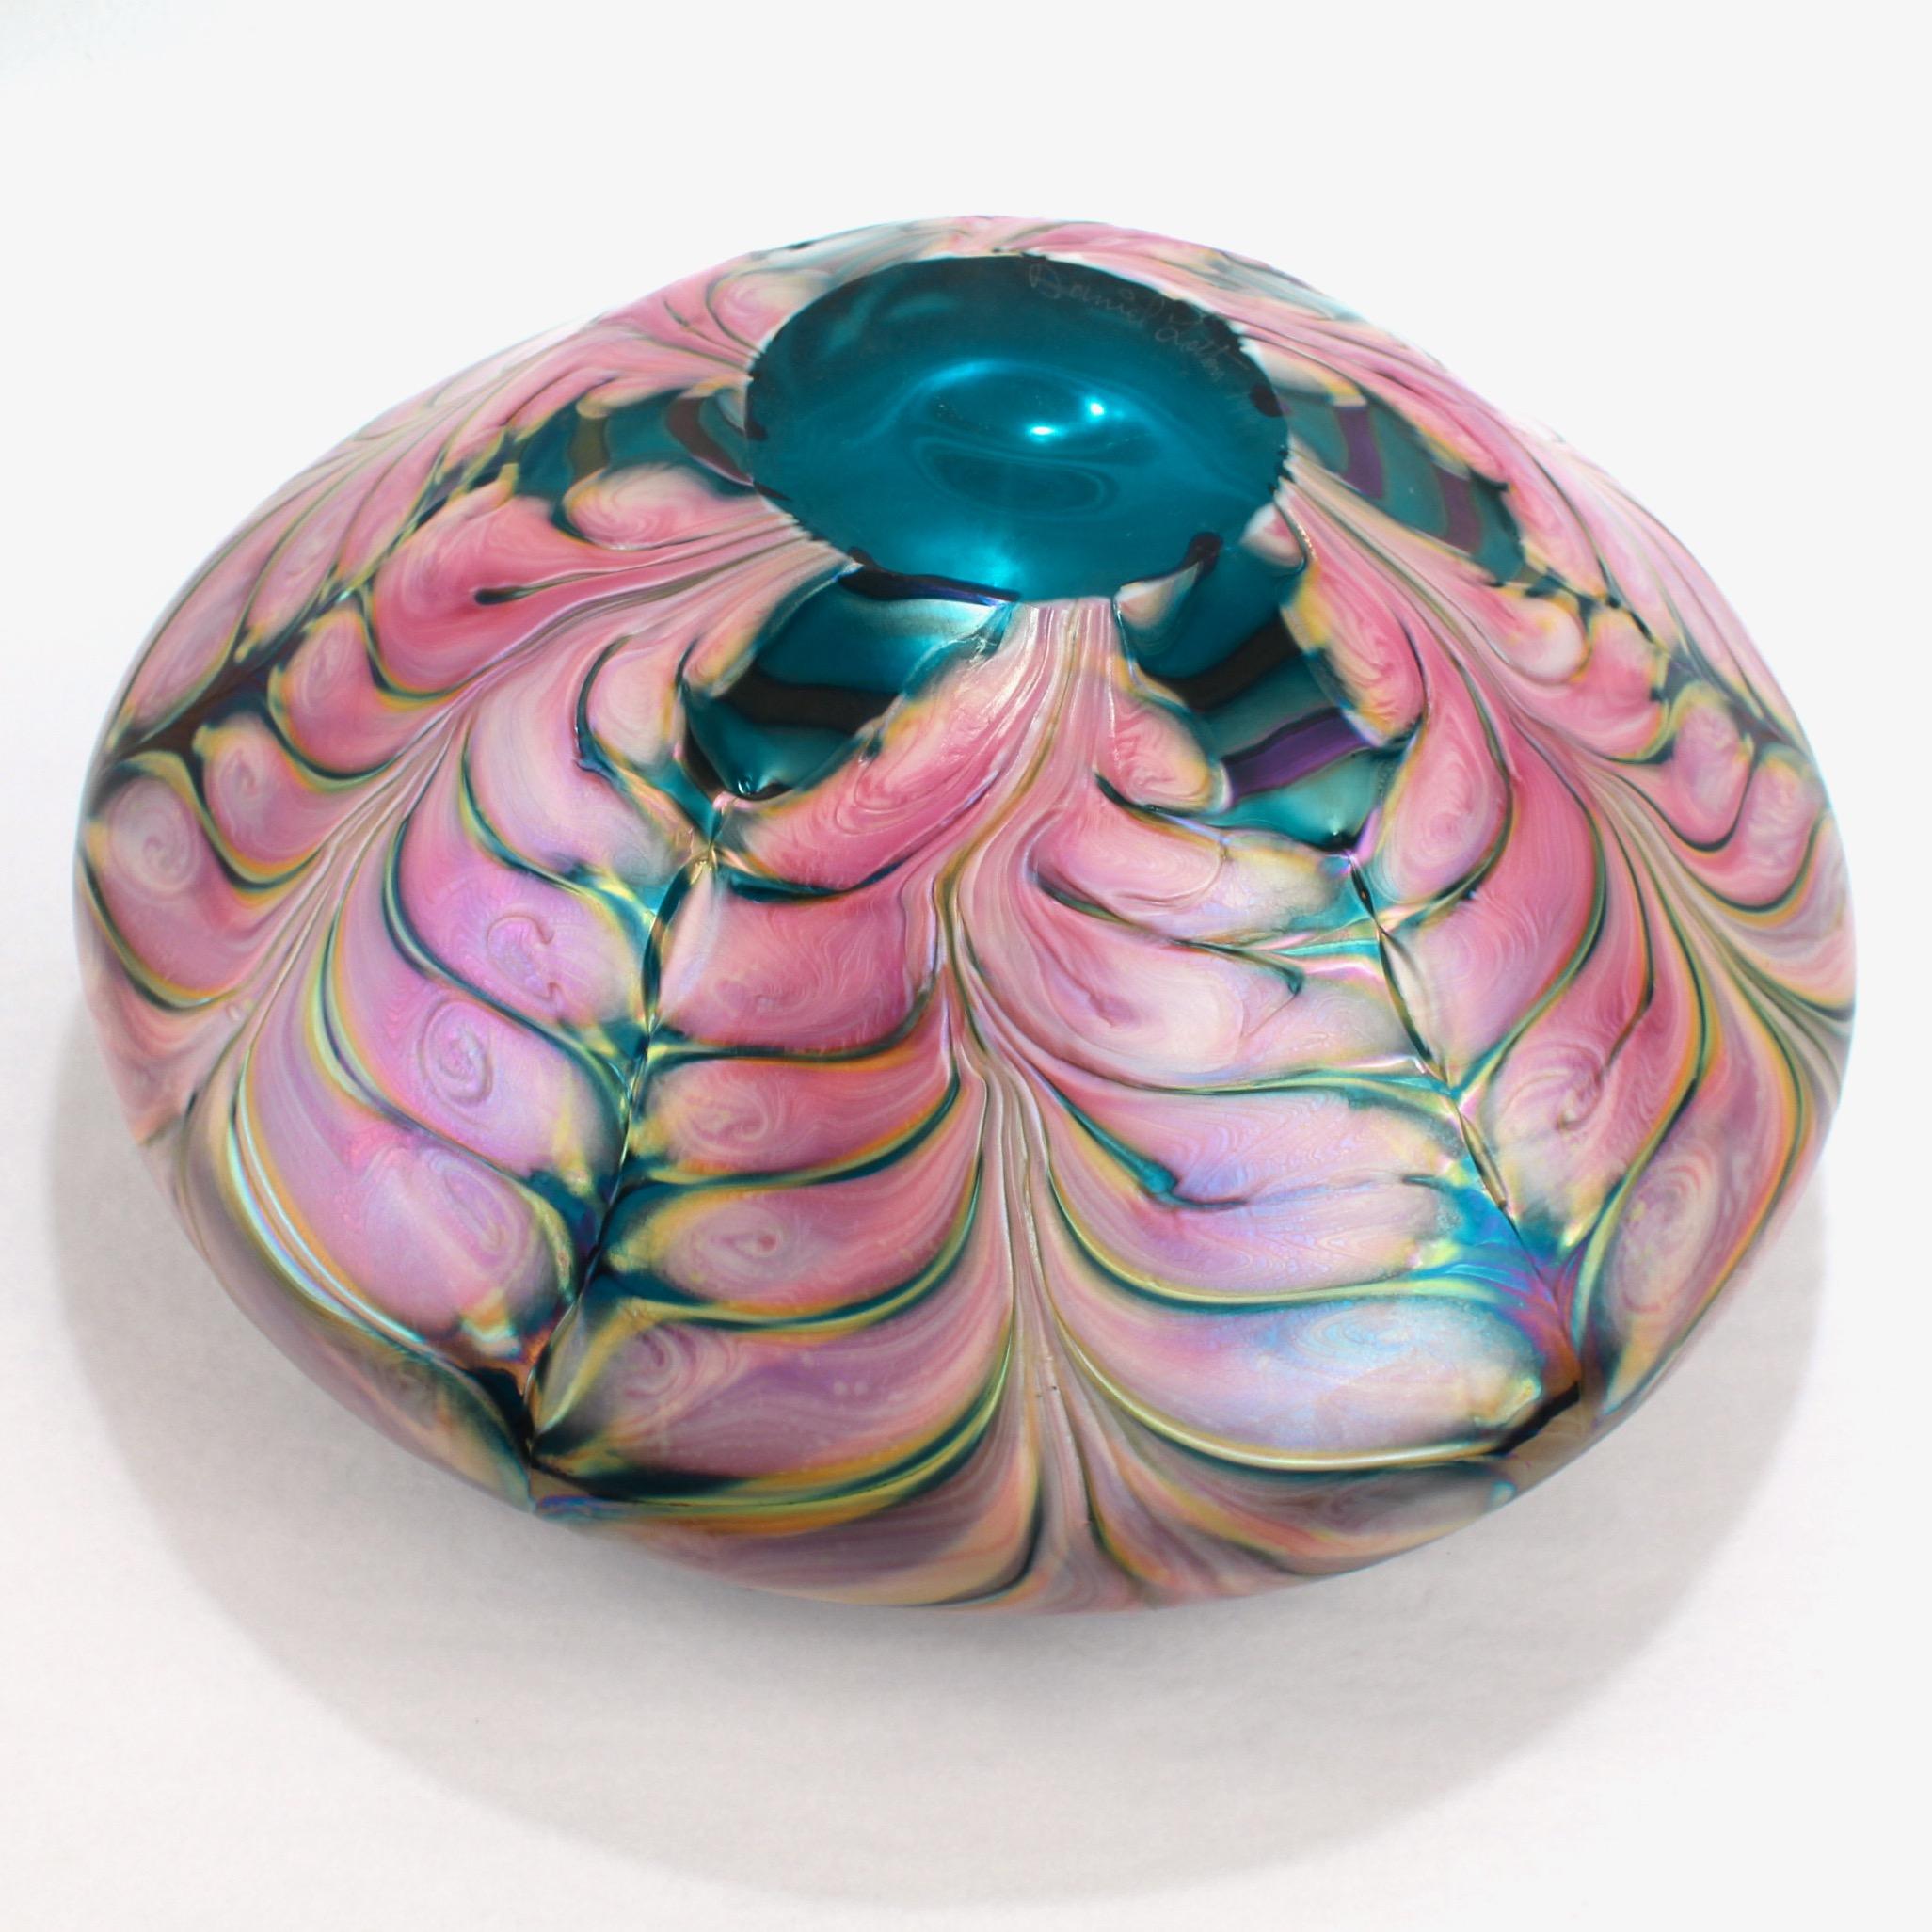 Large Daniel Lotton Pulled Feather Pink and Blue Art Glass Bowl or Vase, 1991 For Sale 1